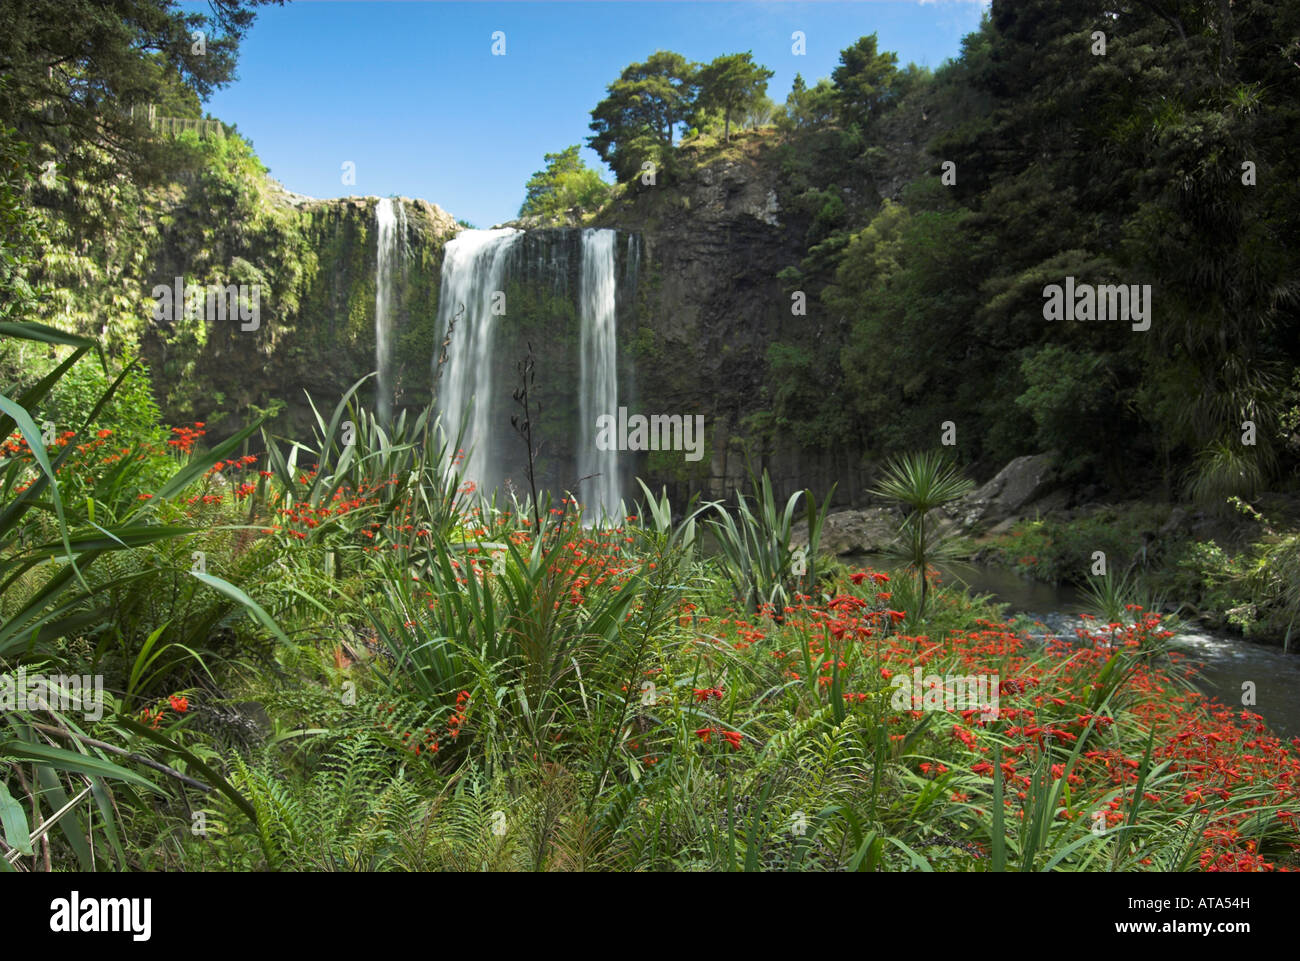 The picturesque Whangarei Waterfall, North Island, New Zealand Stock Photo